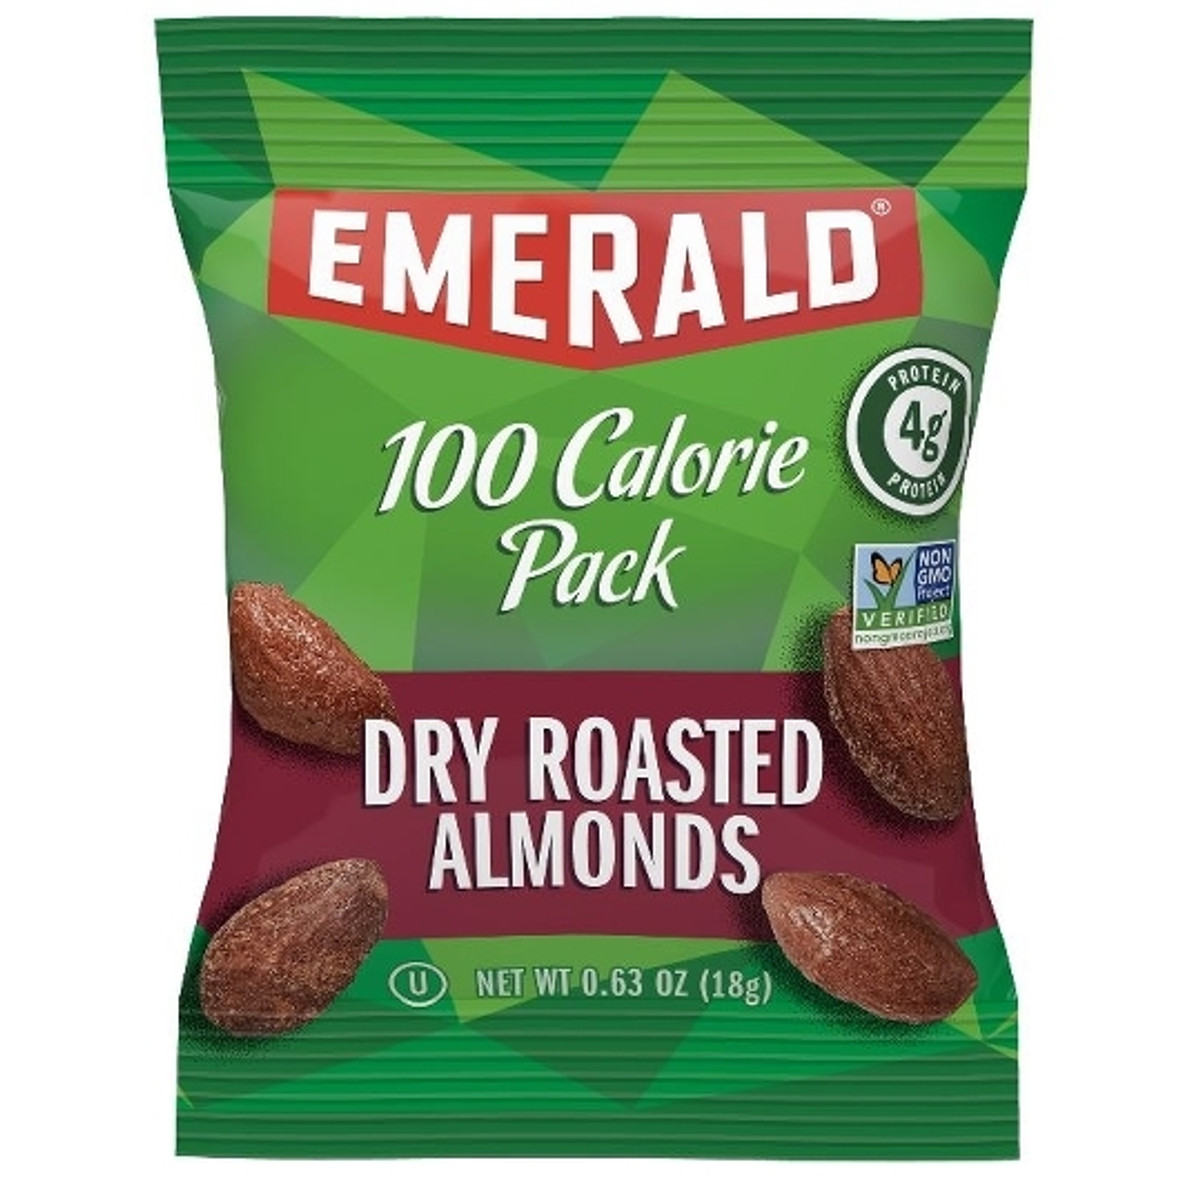 Emerald Dry Roasted Almonds - 100 Calorie Pack, 4.41 Ounce, 12 Per Case